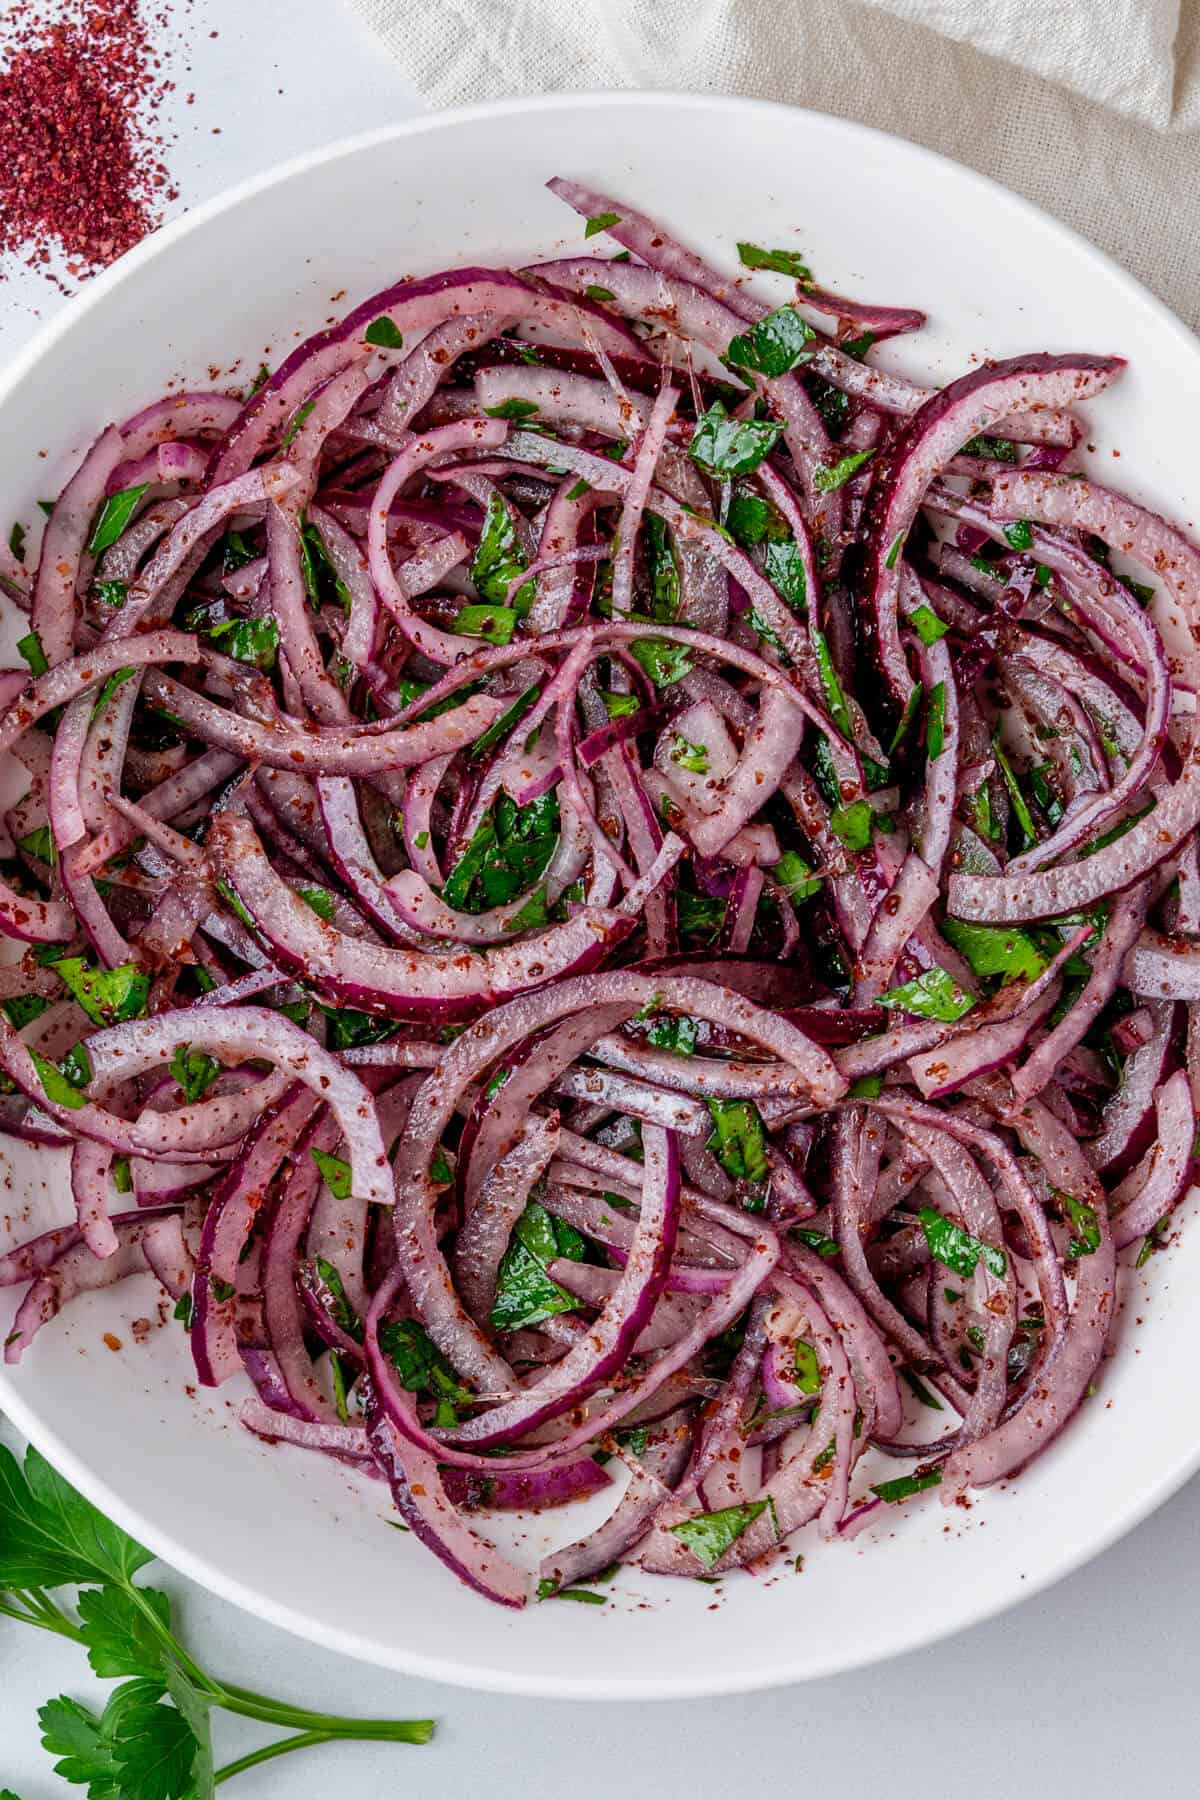 Marinated sumac onions in a bowl